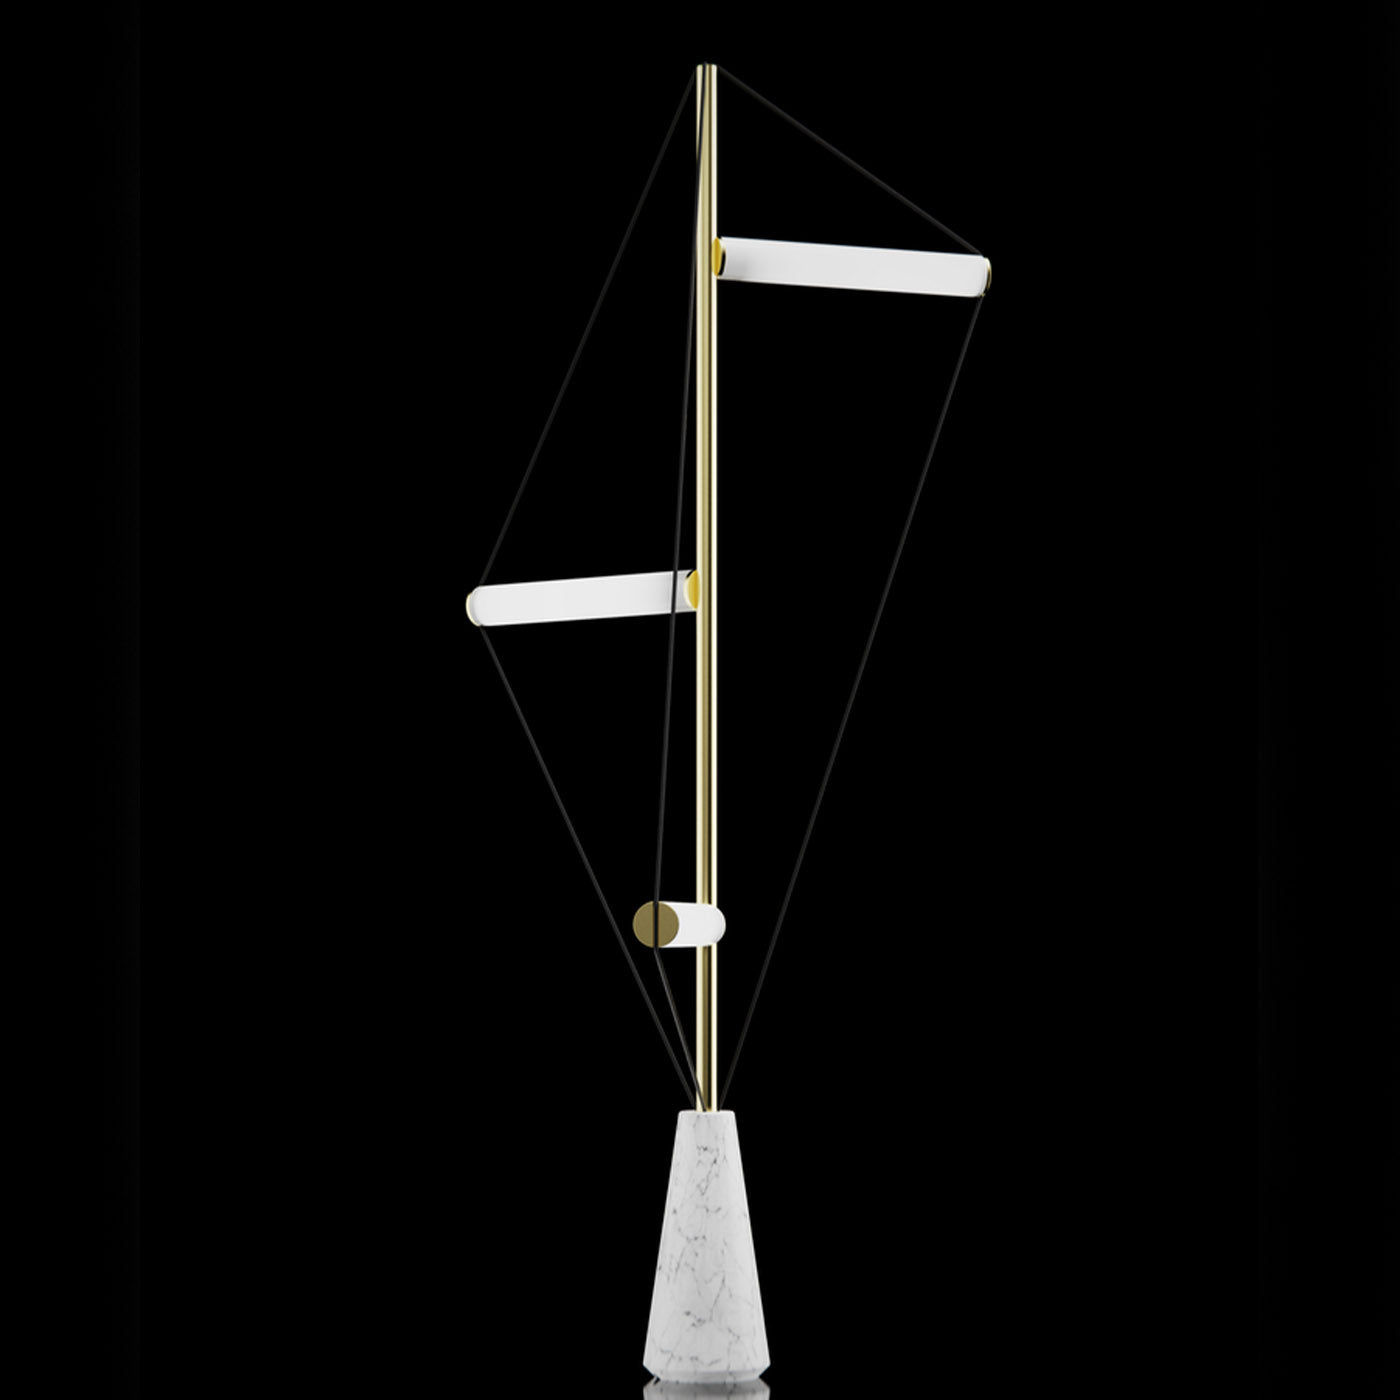 Ed047 Brass Floor Lamp with White Base - Alternative view 4